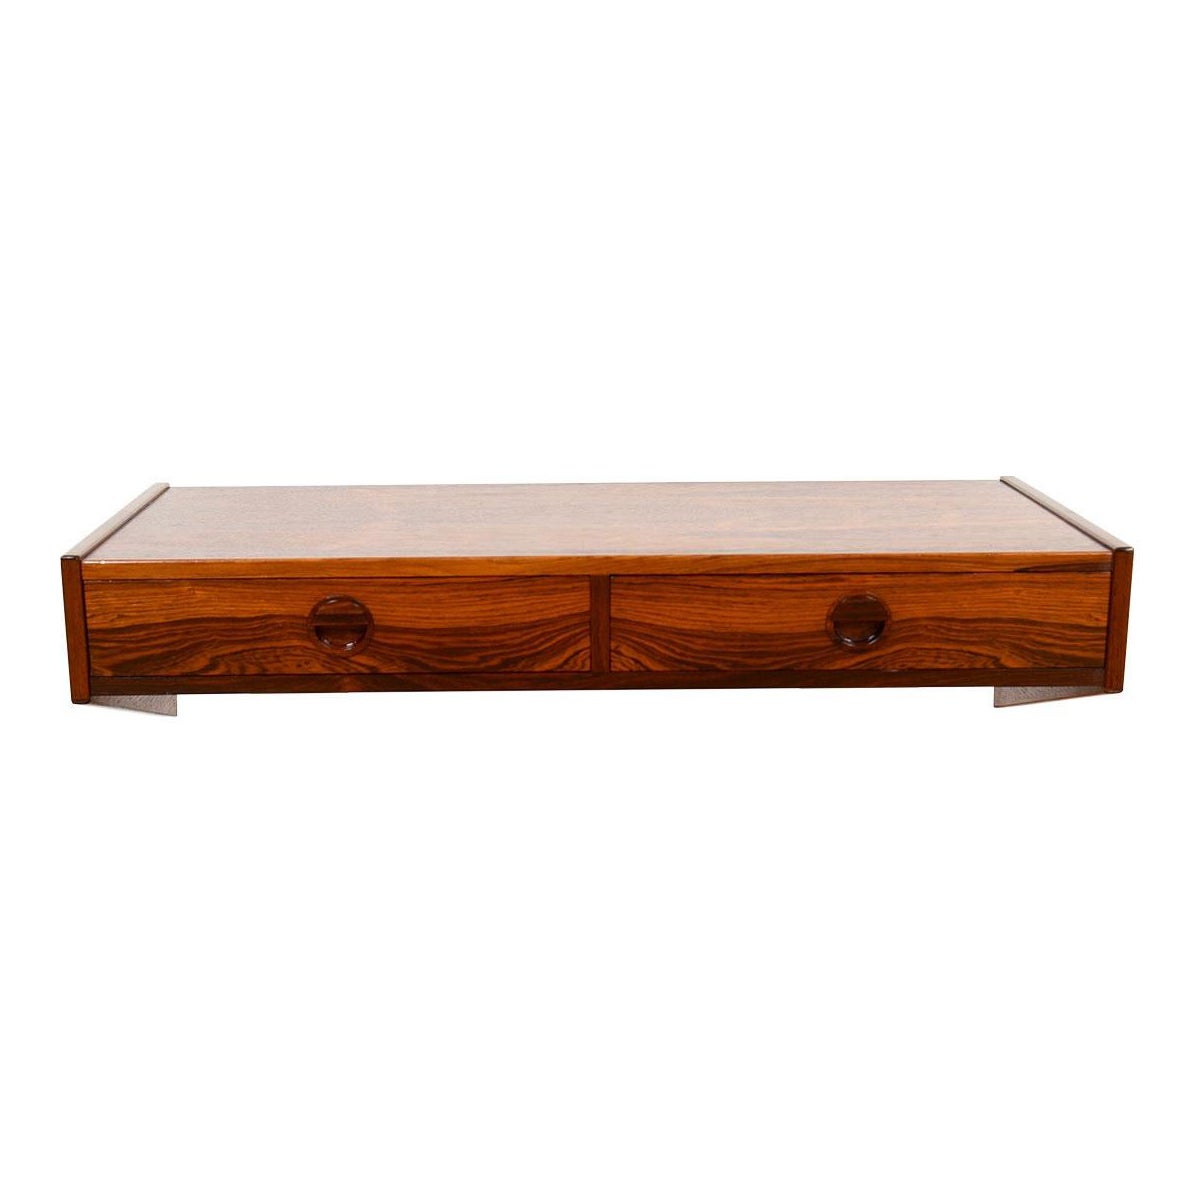 Danish Modern Rosewood 2-Drawer Hanging Accent / Display Shelf For Sale